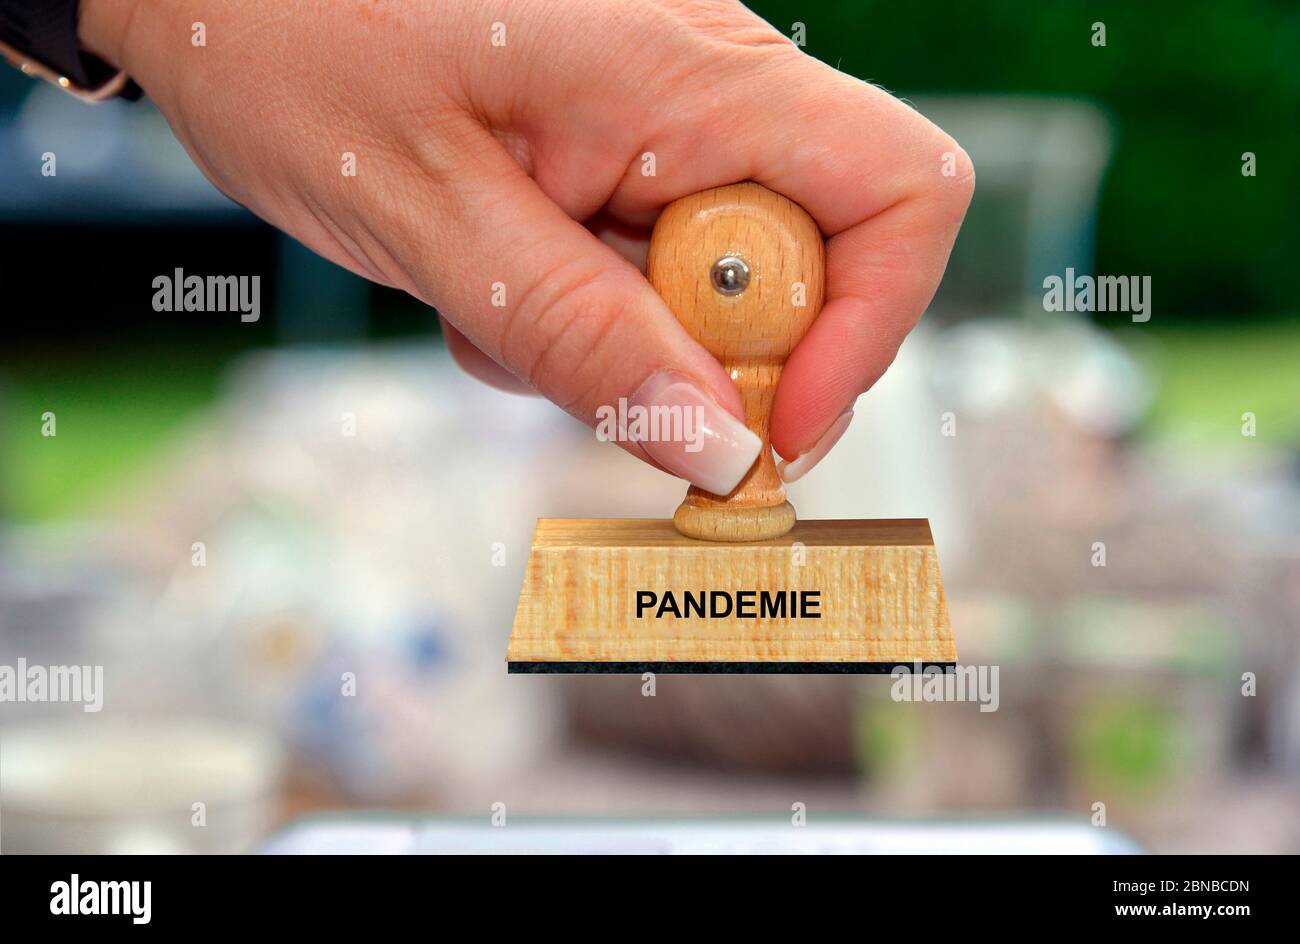 stamp in the hand of a woman lettering Pandemie, pandemia, Germany Stock Photo